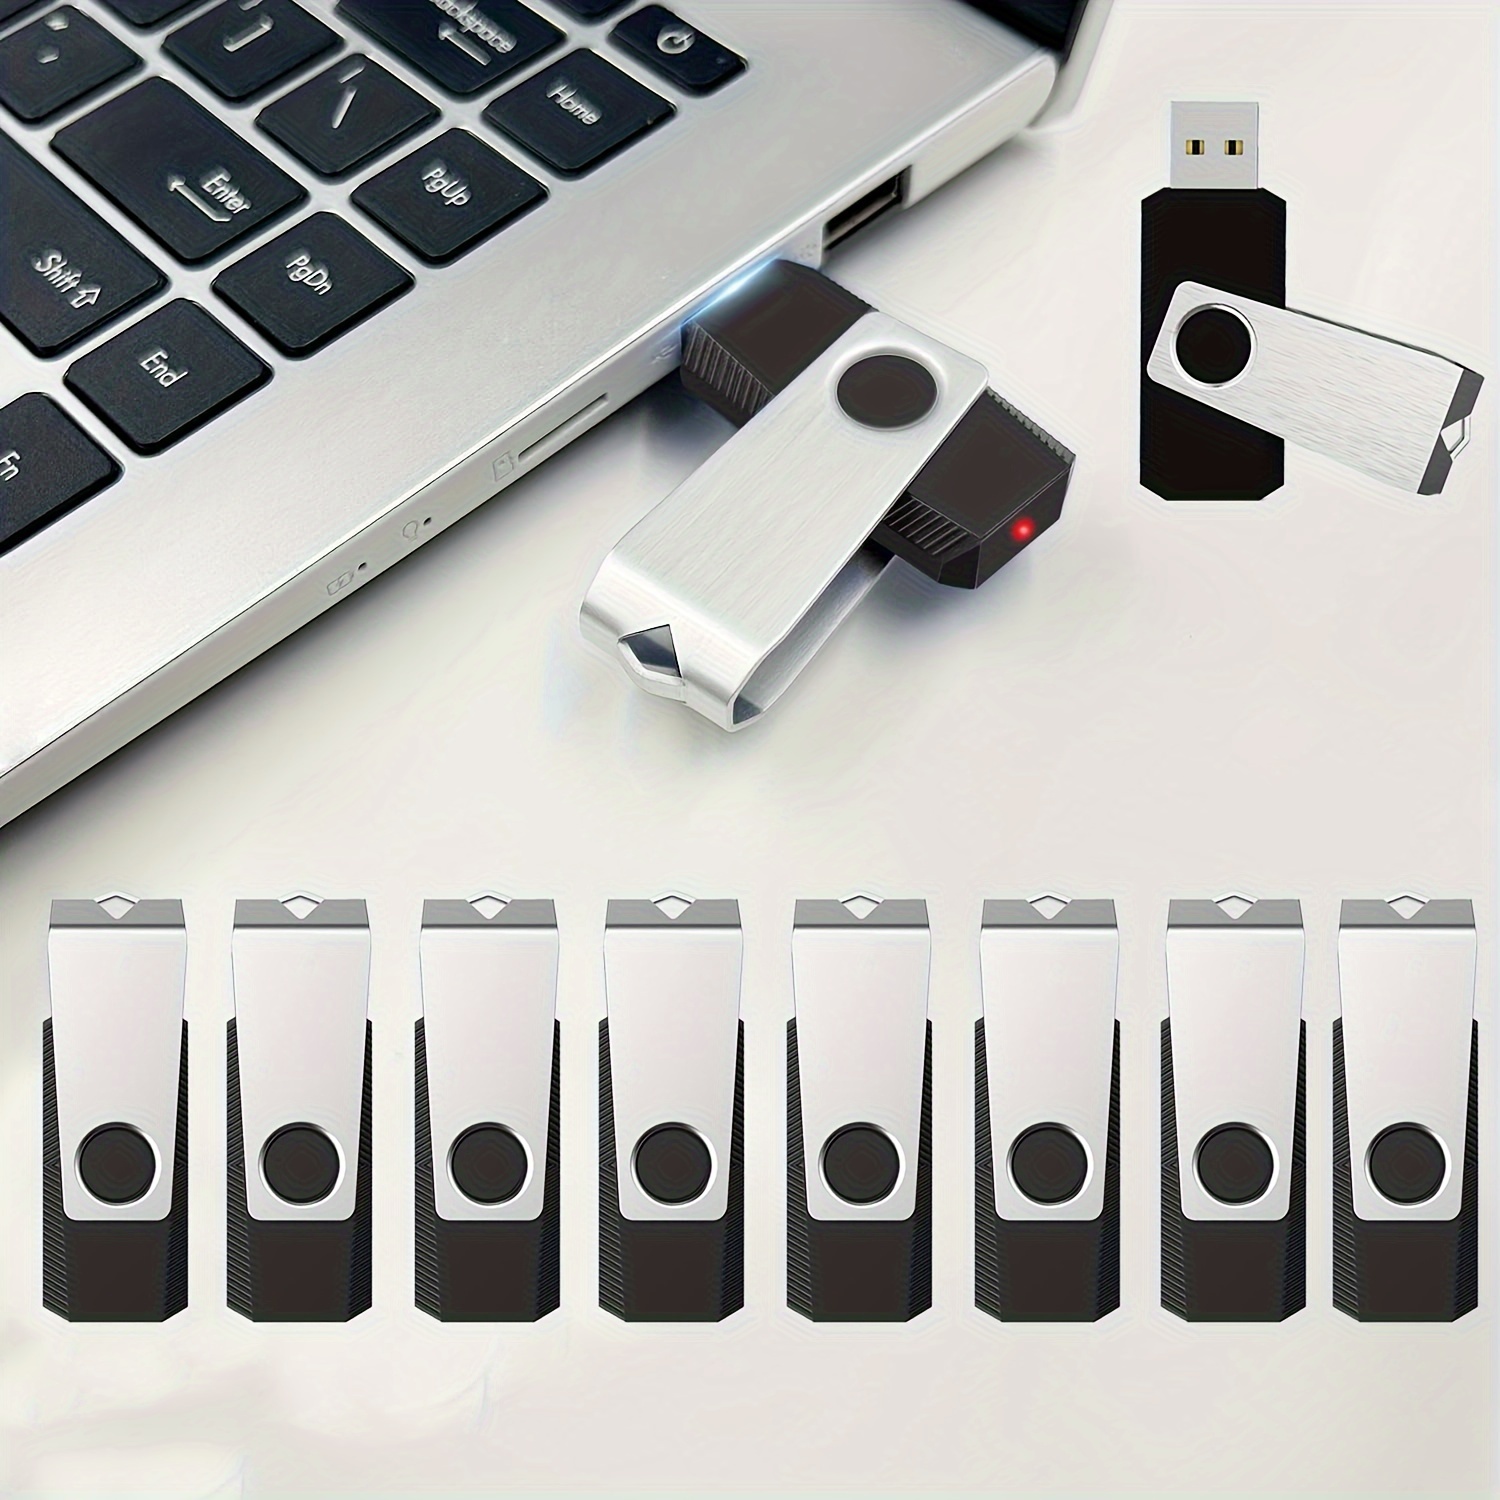 8GB USB Flash Drives 5 Pack 8GB Thumb Drives Memory Stick Jump Drive with  LED Light for Storage and Backup (5 Colors: Black Blue Green Red Silver)